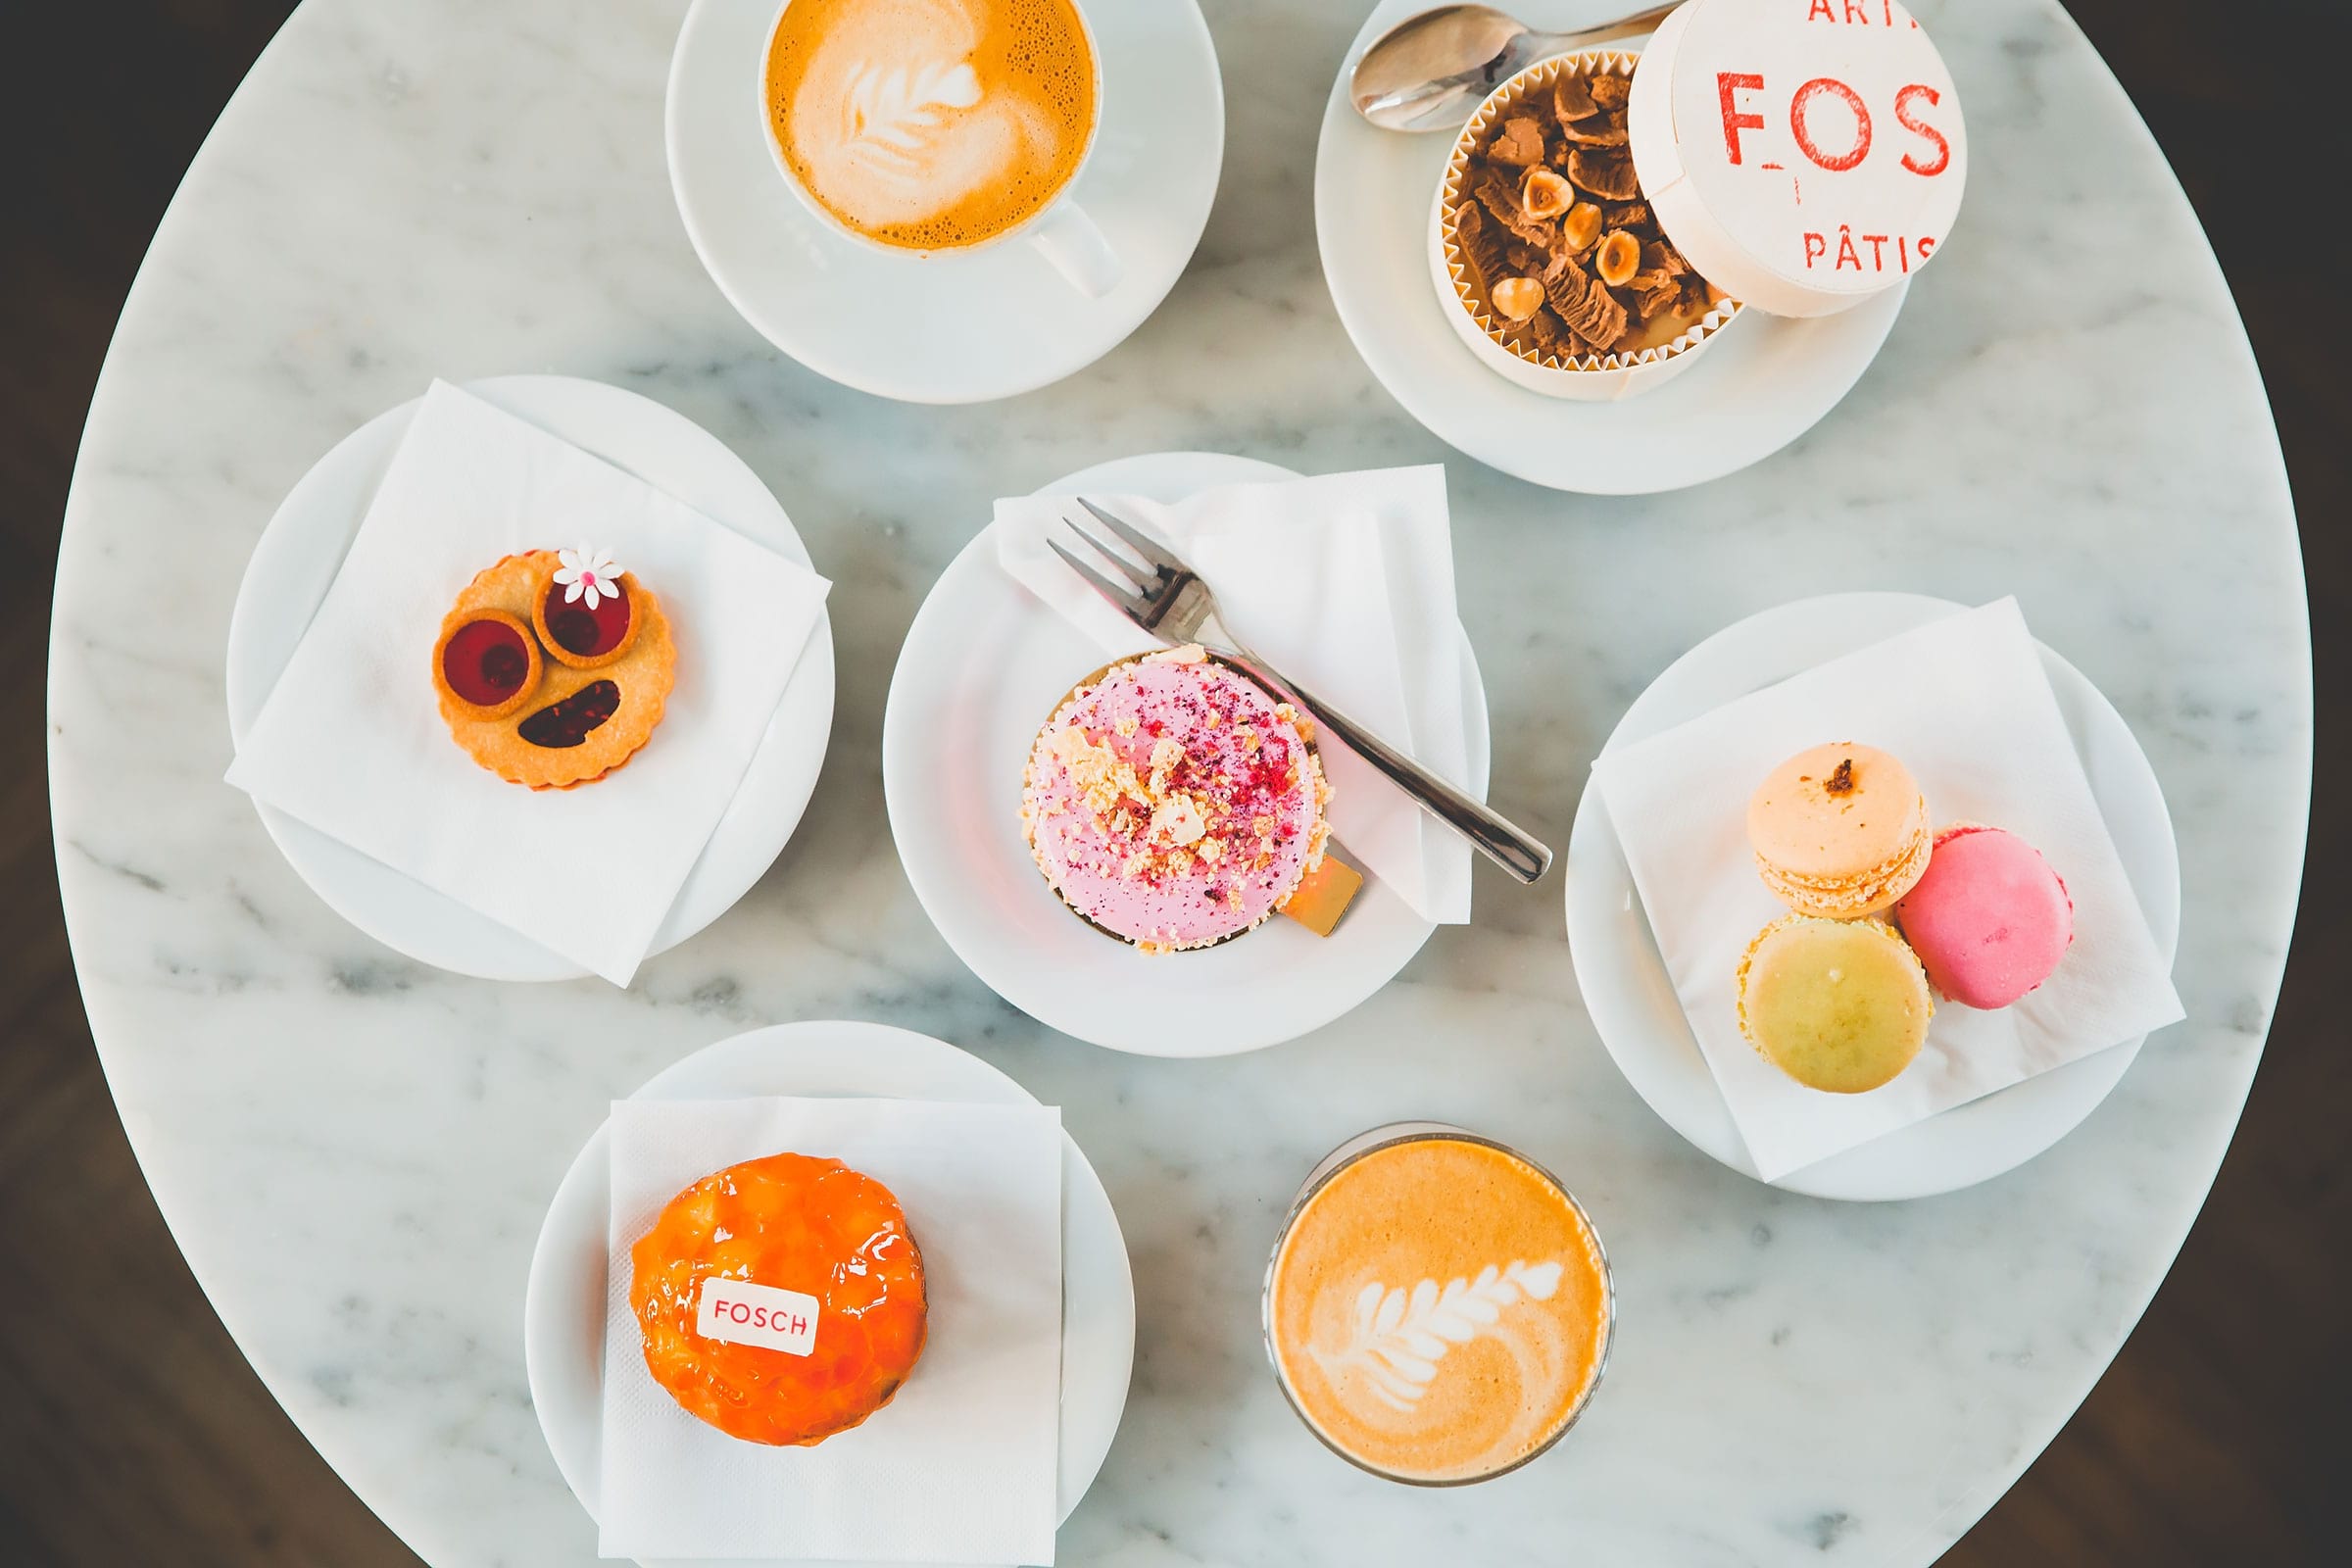 Where to find Stockholm's best patisseries